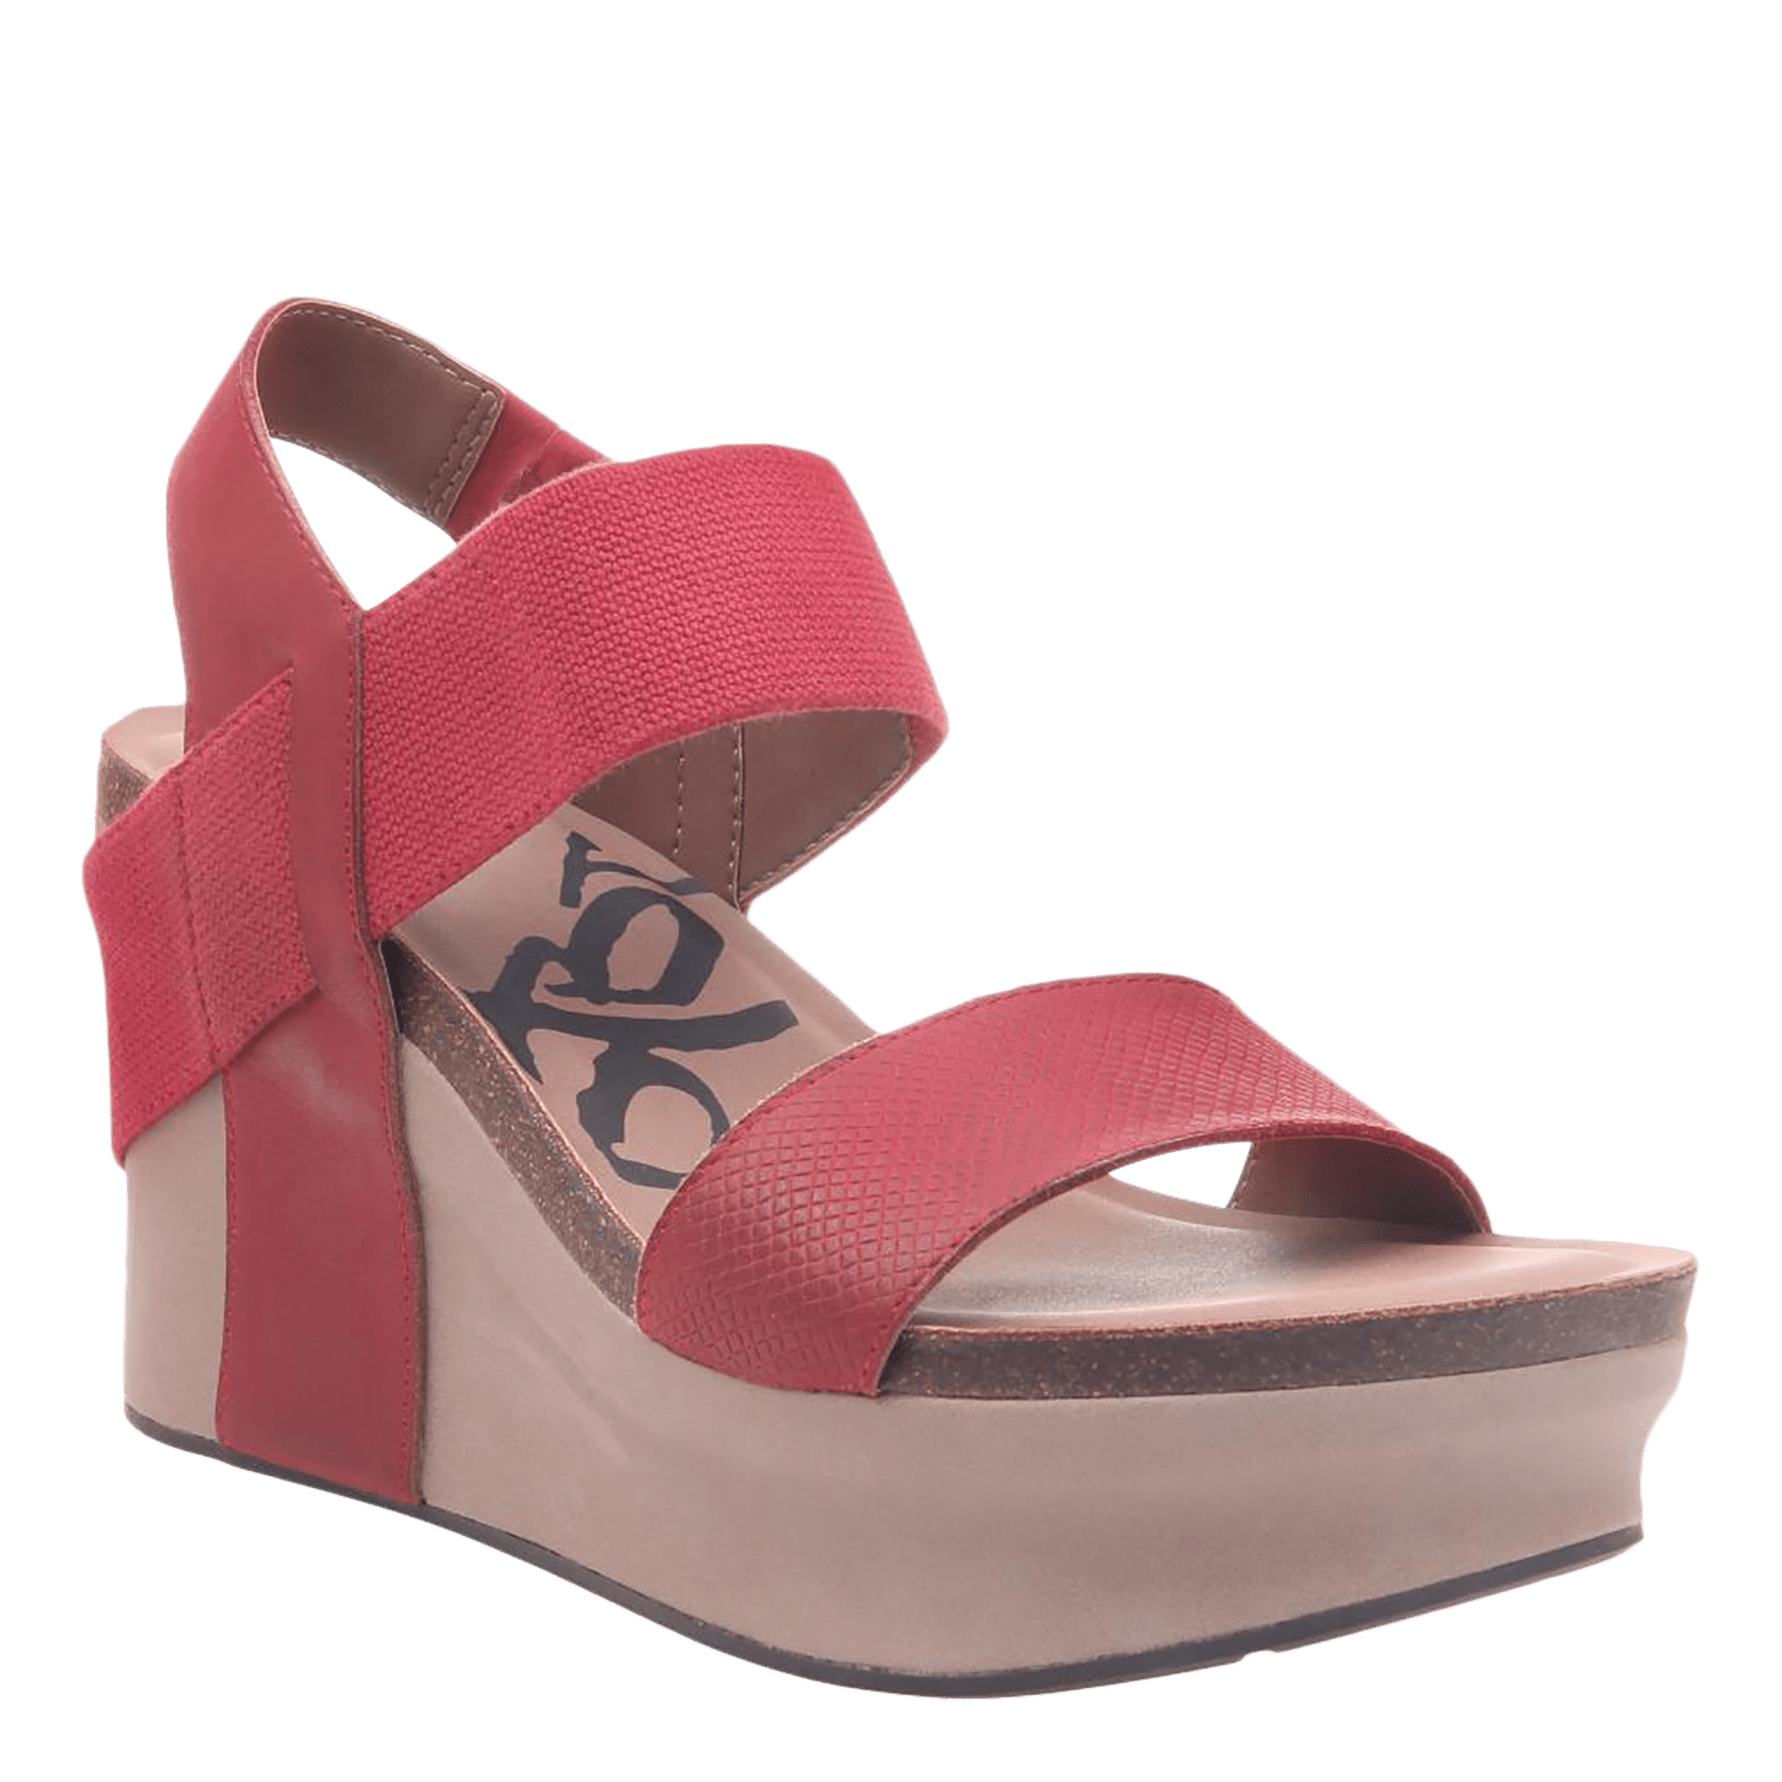 Bushnell in Red Wedge Sandals | Women's 